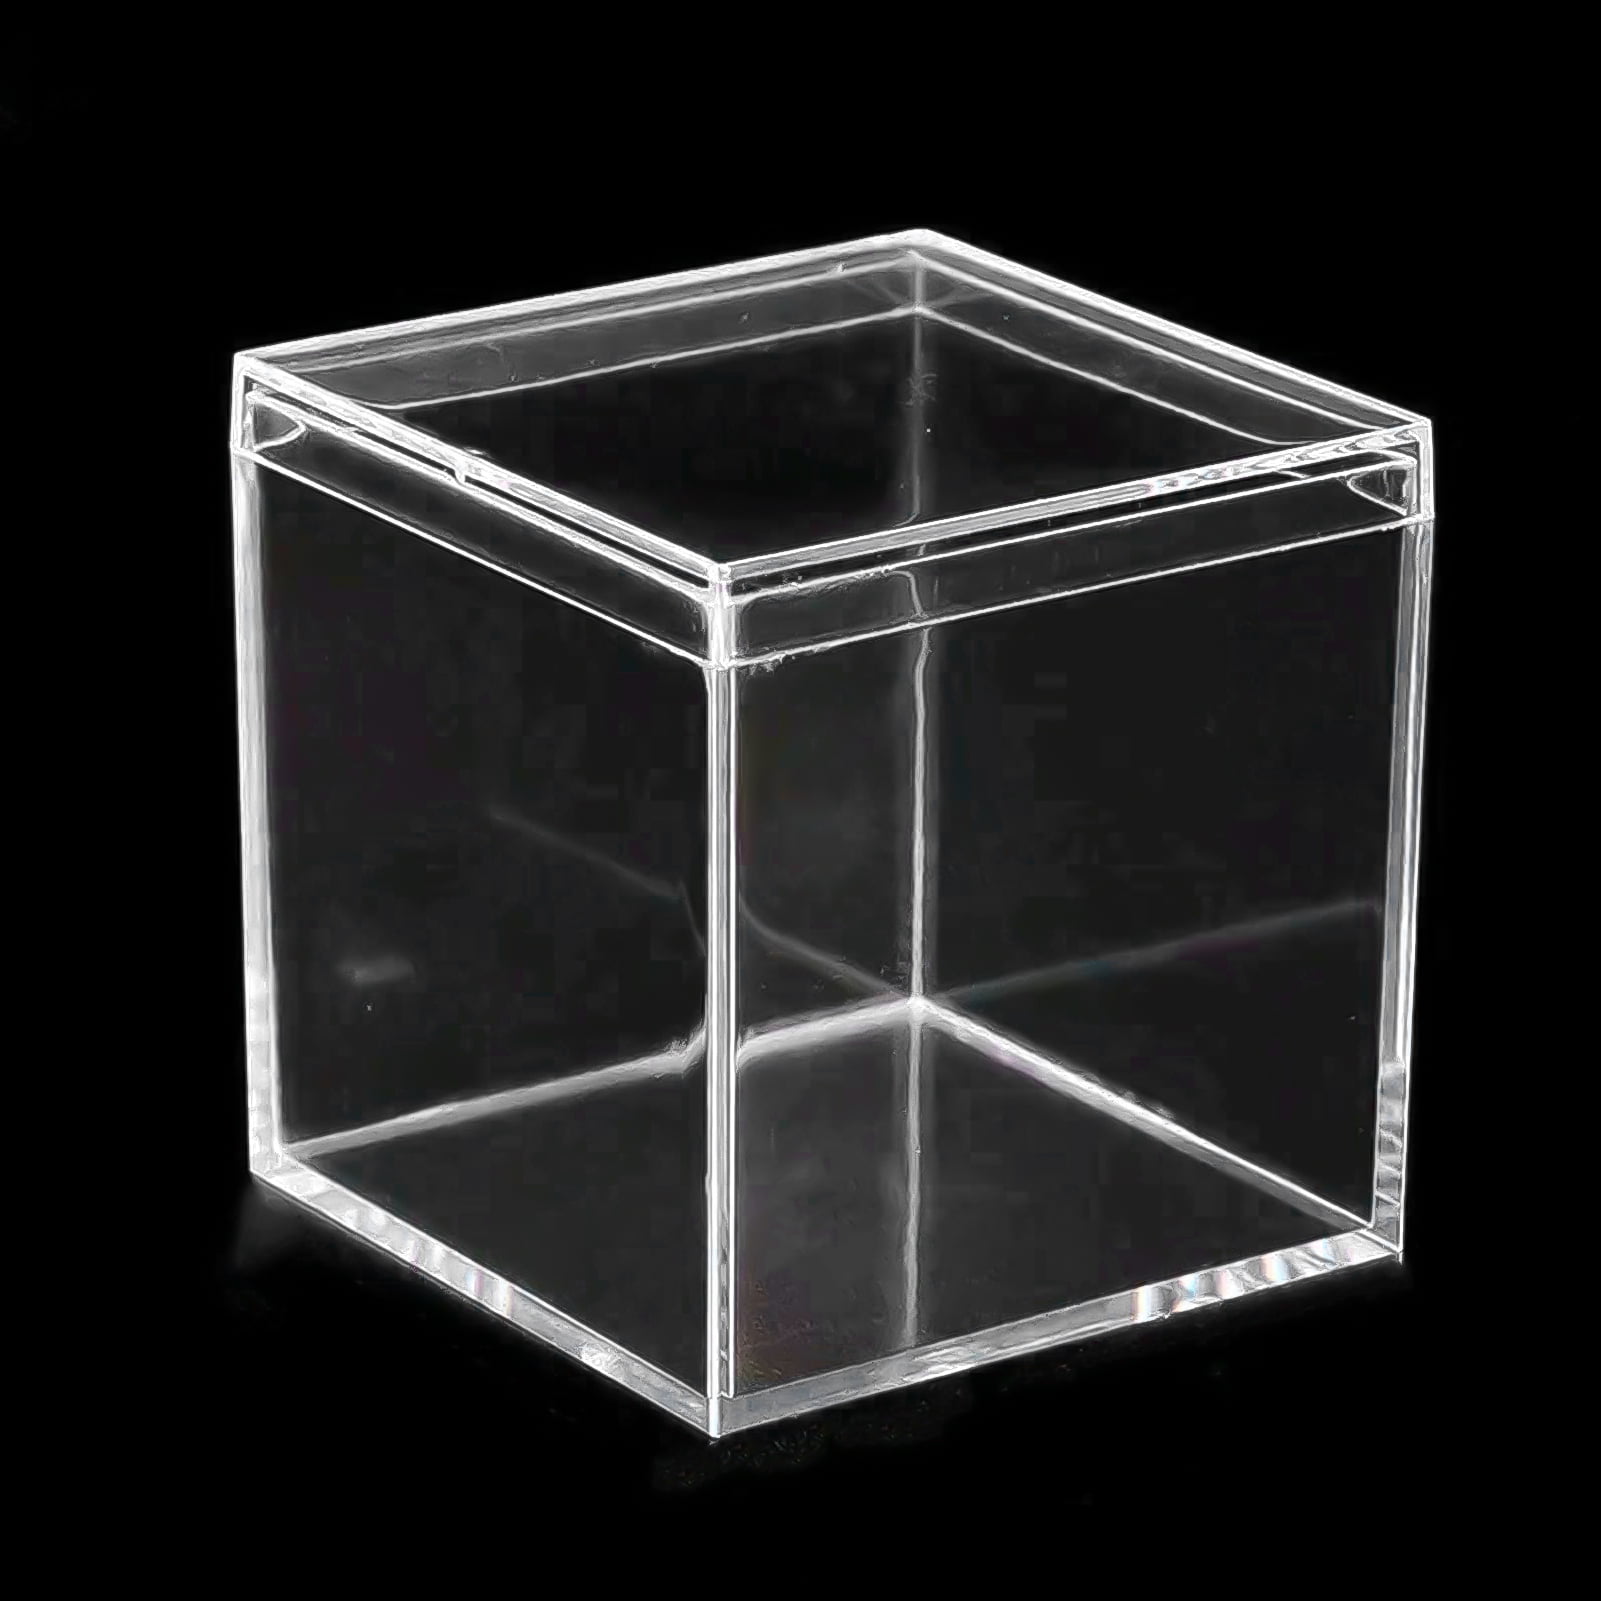 Cube Shaped Acrylic Container With Candy | Plum Grove